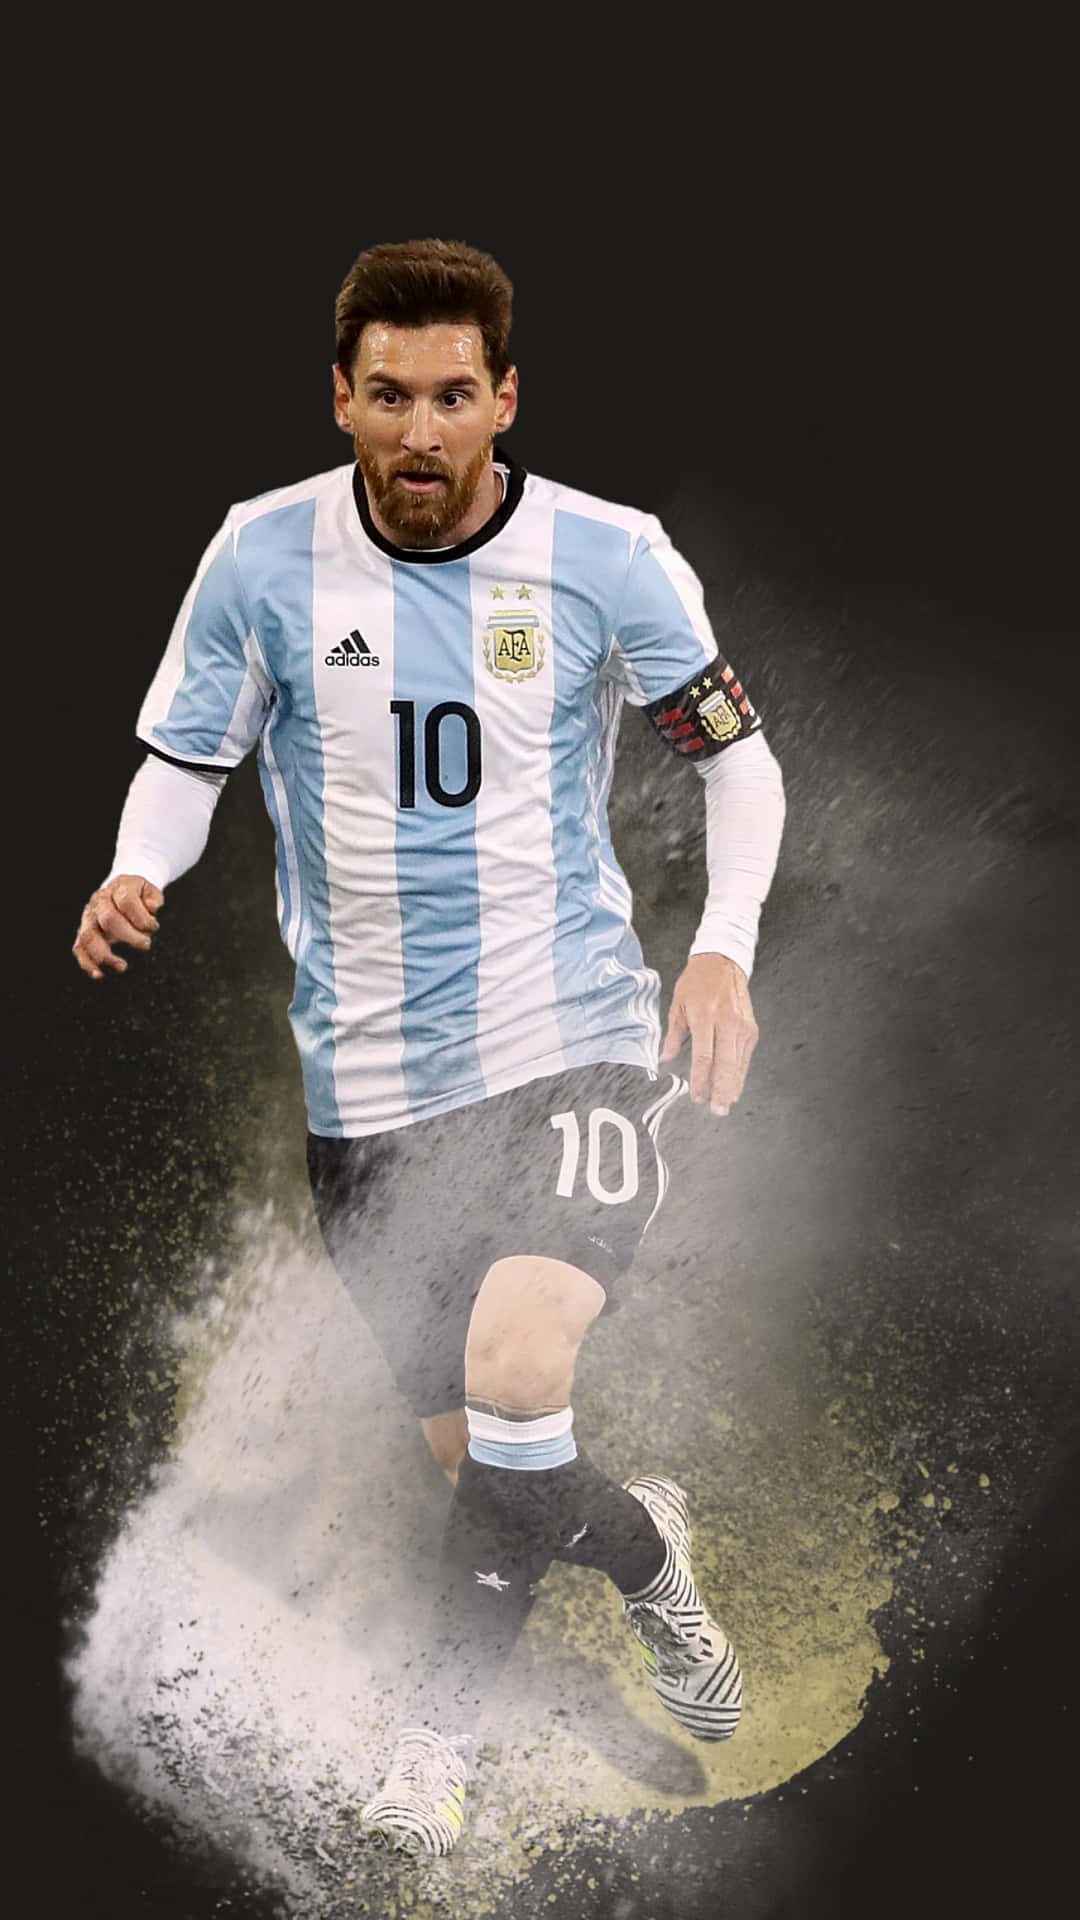 Messi Chills Out On the Field Wallpaper